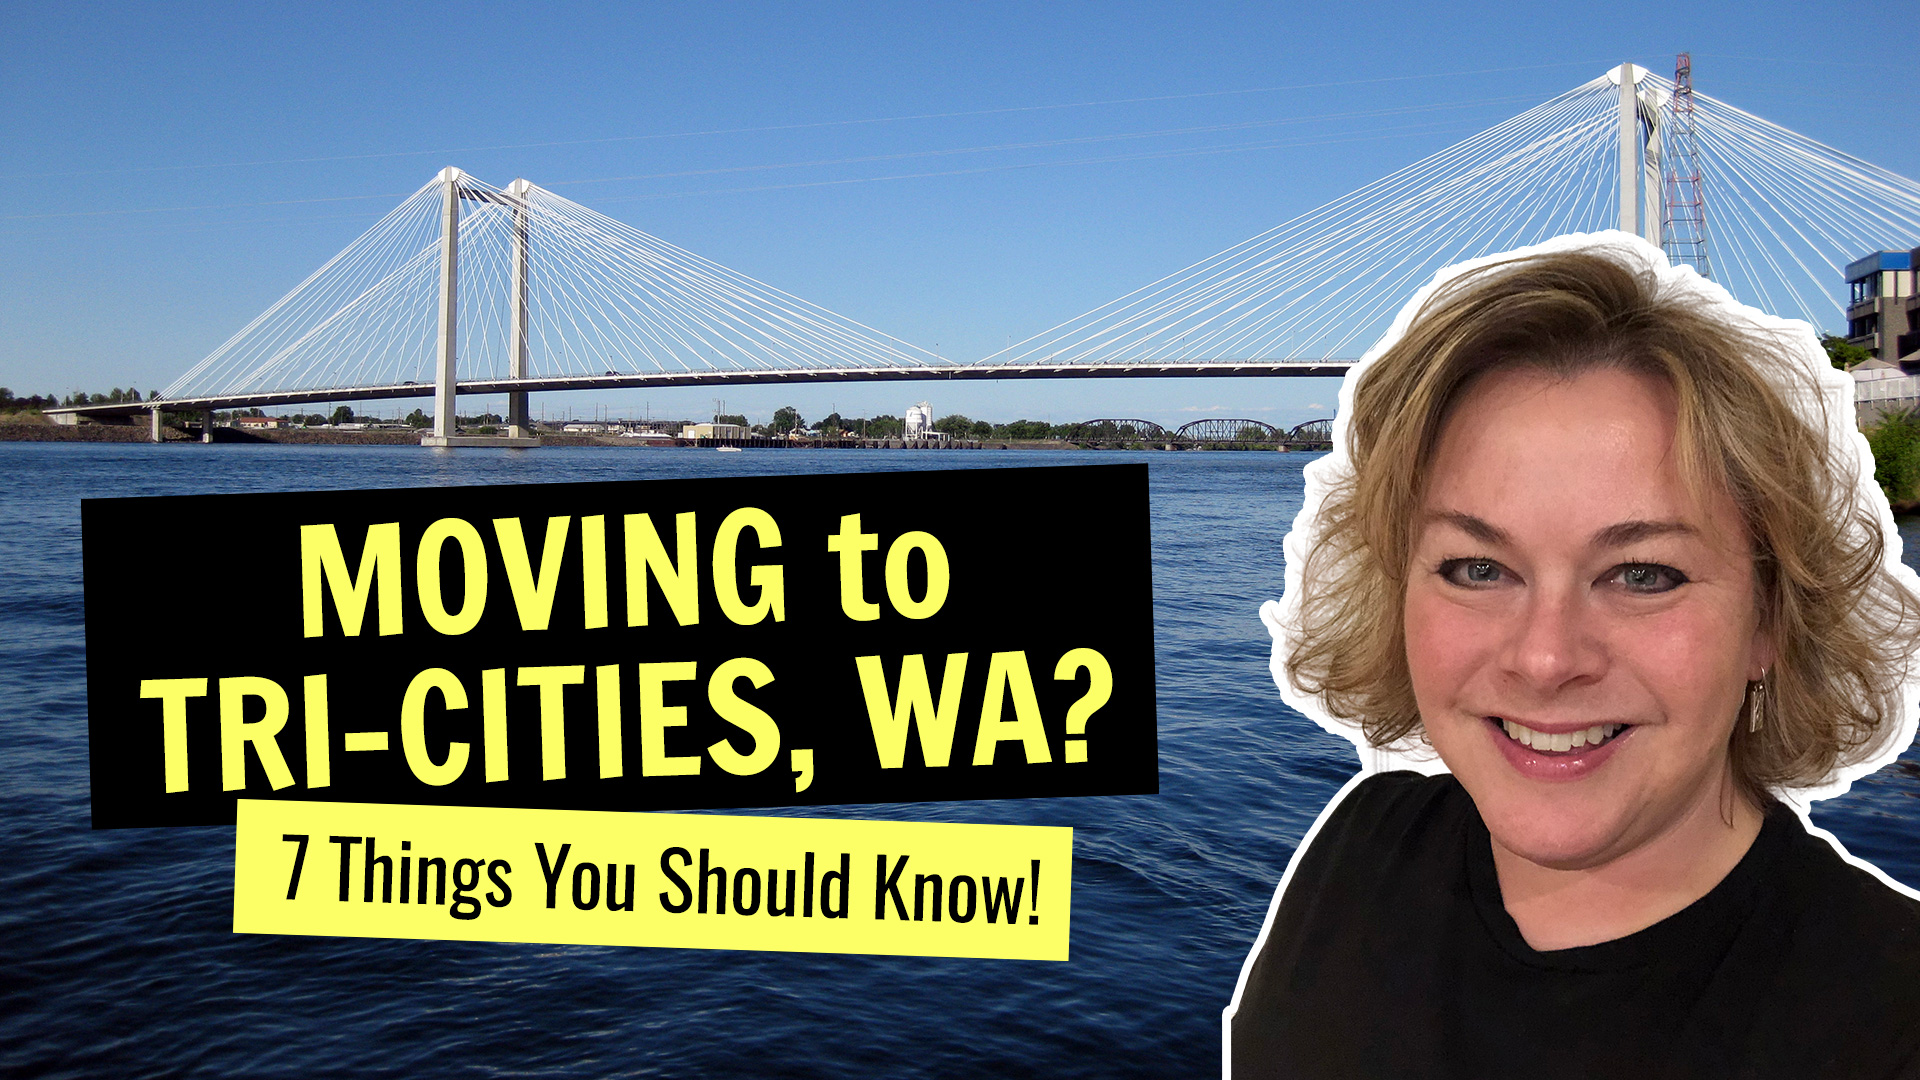 Thinking About Relocating to the Tri-Cities? This Video Will Help